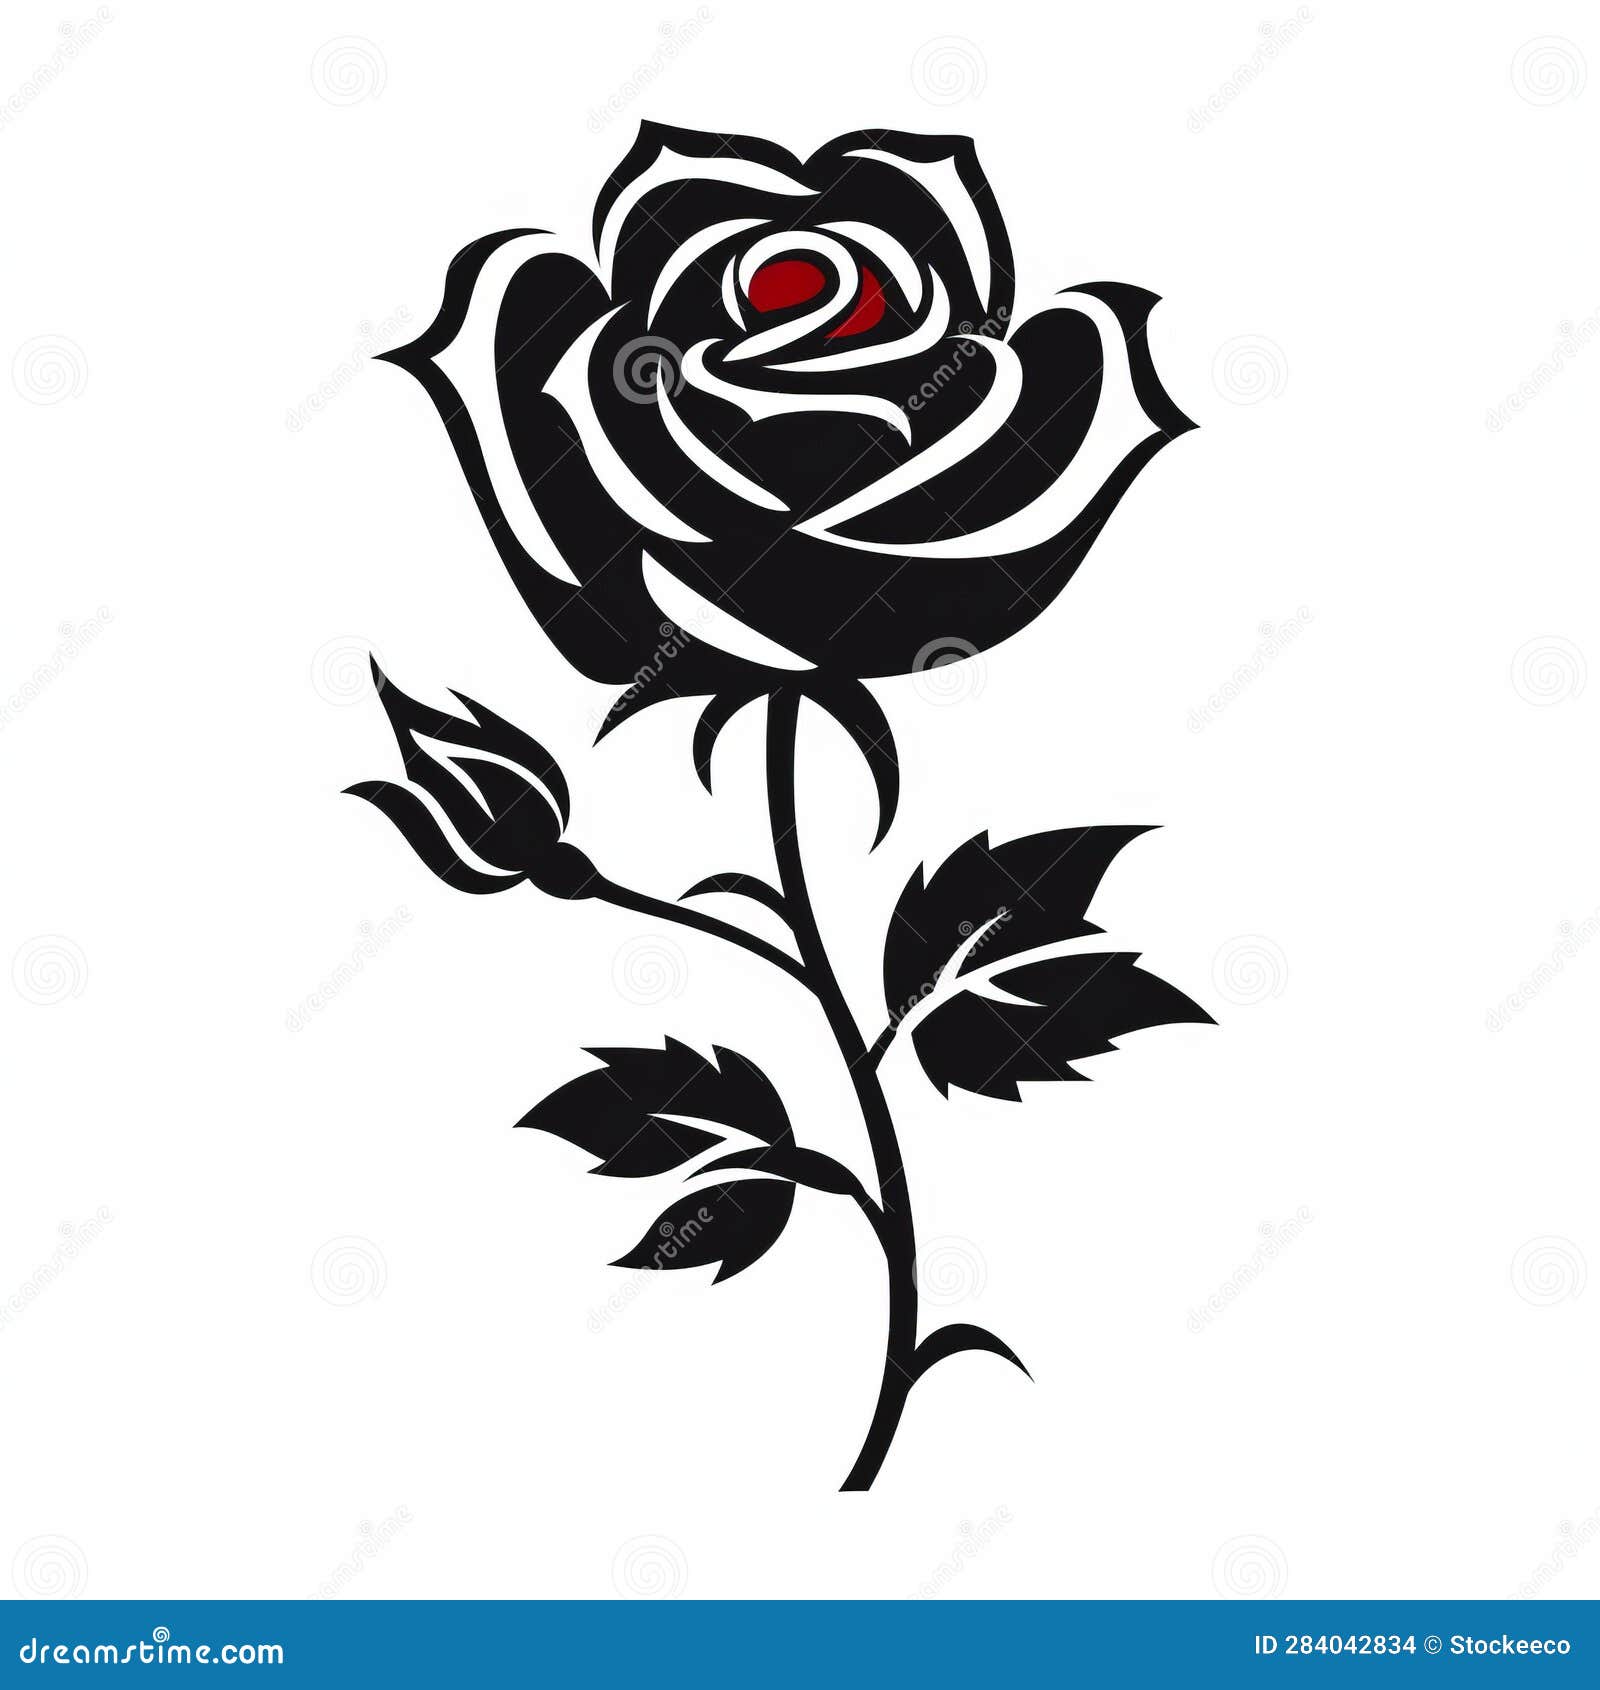 Contemporary Chicano Black Rose Silhouette on White Background Stock ...